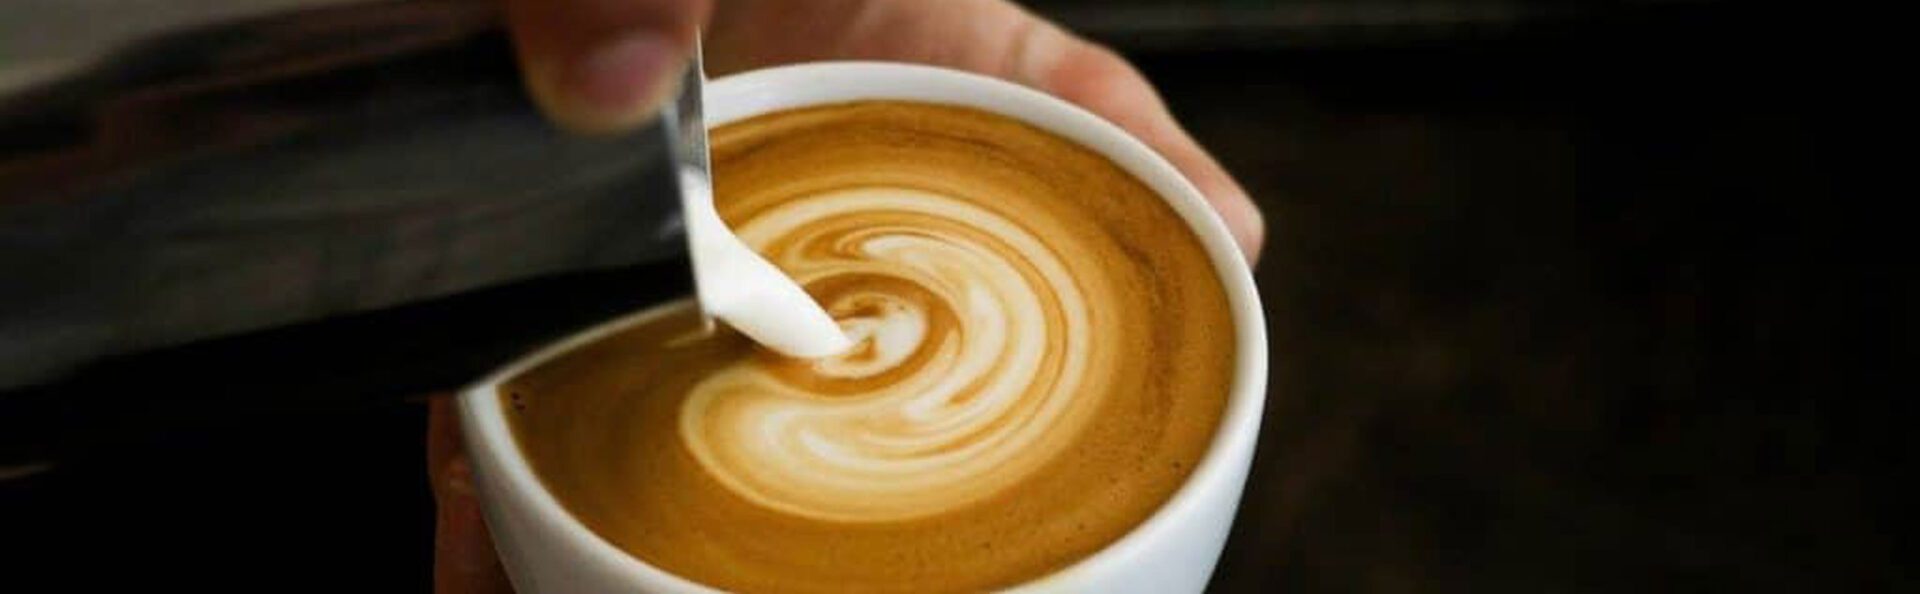 A person is pouring liquid into a cup of coffee.